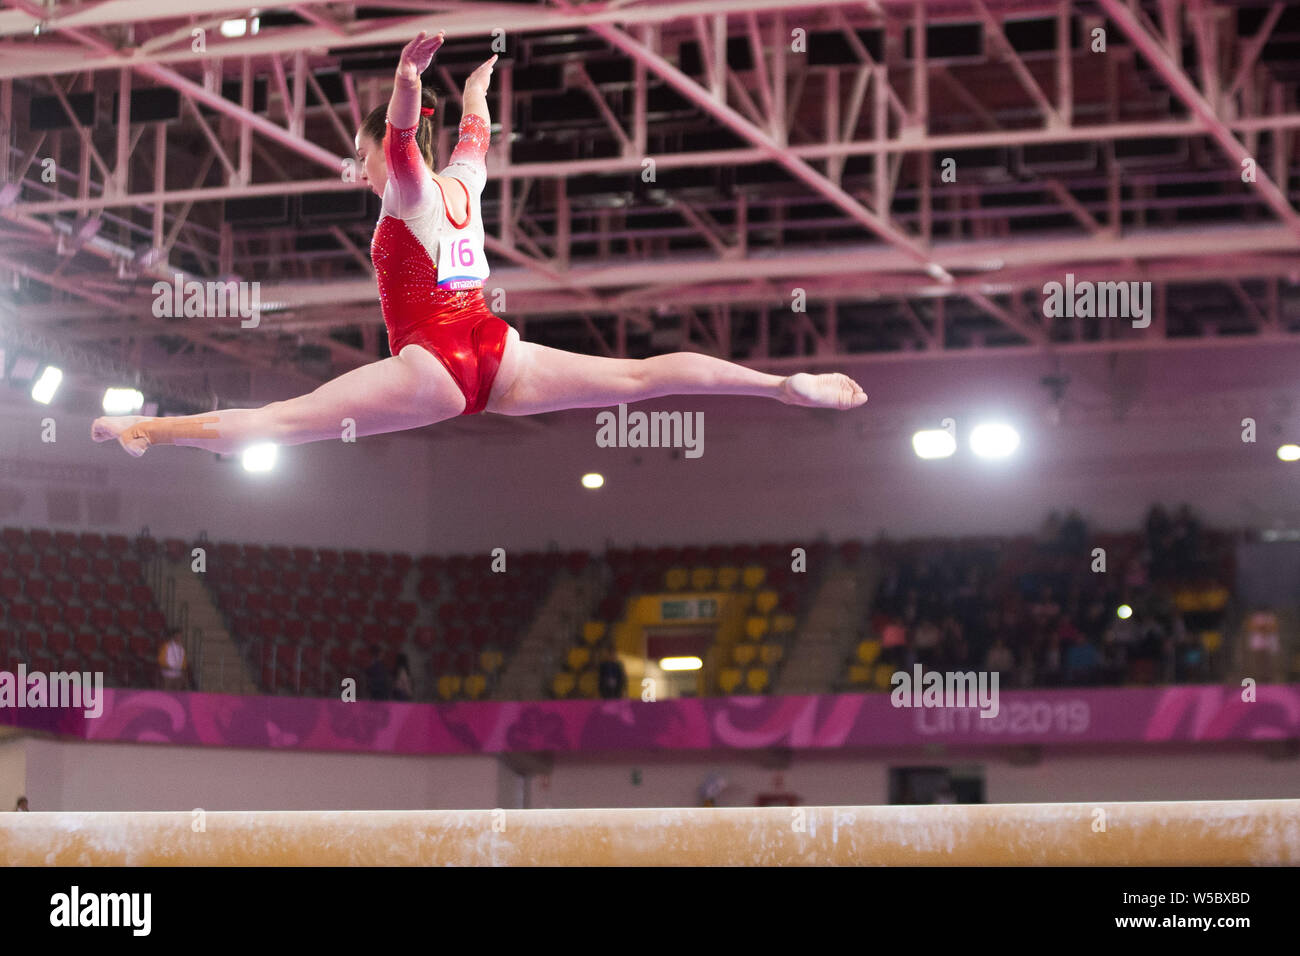 Lima, Peru. 27th July, 2019. Isabela Onyshko of Canada (#16) performs her beam routine during the Pan American Games Women's Artistic Gymnastics, Qualification and Team Final at Polideportivo Villa el Salvador in Lima, Peru. Daniel Lea/CSM/Alamy Live News Stock Photo